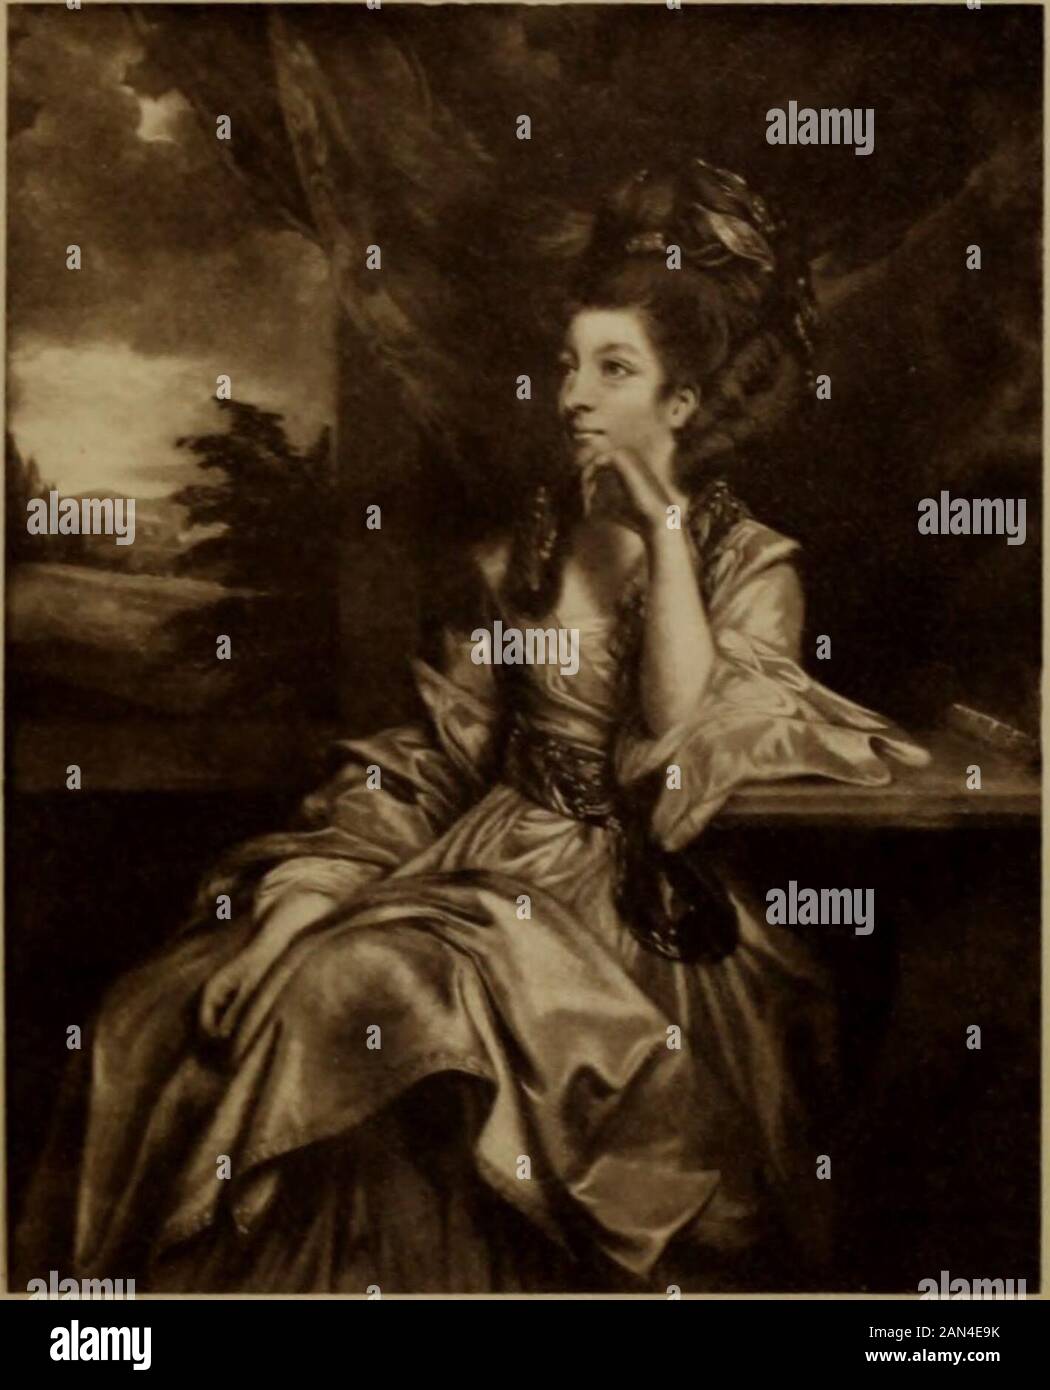 Illustrated catalogue of the art and literary property collected by the late Henry GMarquand . 1433 1431 — The Penn Family. After the painting by Sir Joshua Reynolds. Published by C. Turner, Dec. 25, 1819. With the title, engraved in script,below.Margins are: at top and sides, 1 inch; at bottom, 1 ^ inches. Magnificent impres-sion, in perfect condition. Gold frame. The children of Thomas Penn, Esq., of Stoke Park, Bucks, and Lady JulianaPenn, fourth daughter of the 1st Earl of Pomfret, and grandchildren of the famousWilliam Penn. Counting from left to right of the print, the children are :Loui Stock Photo